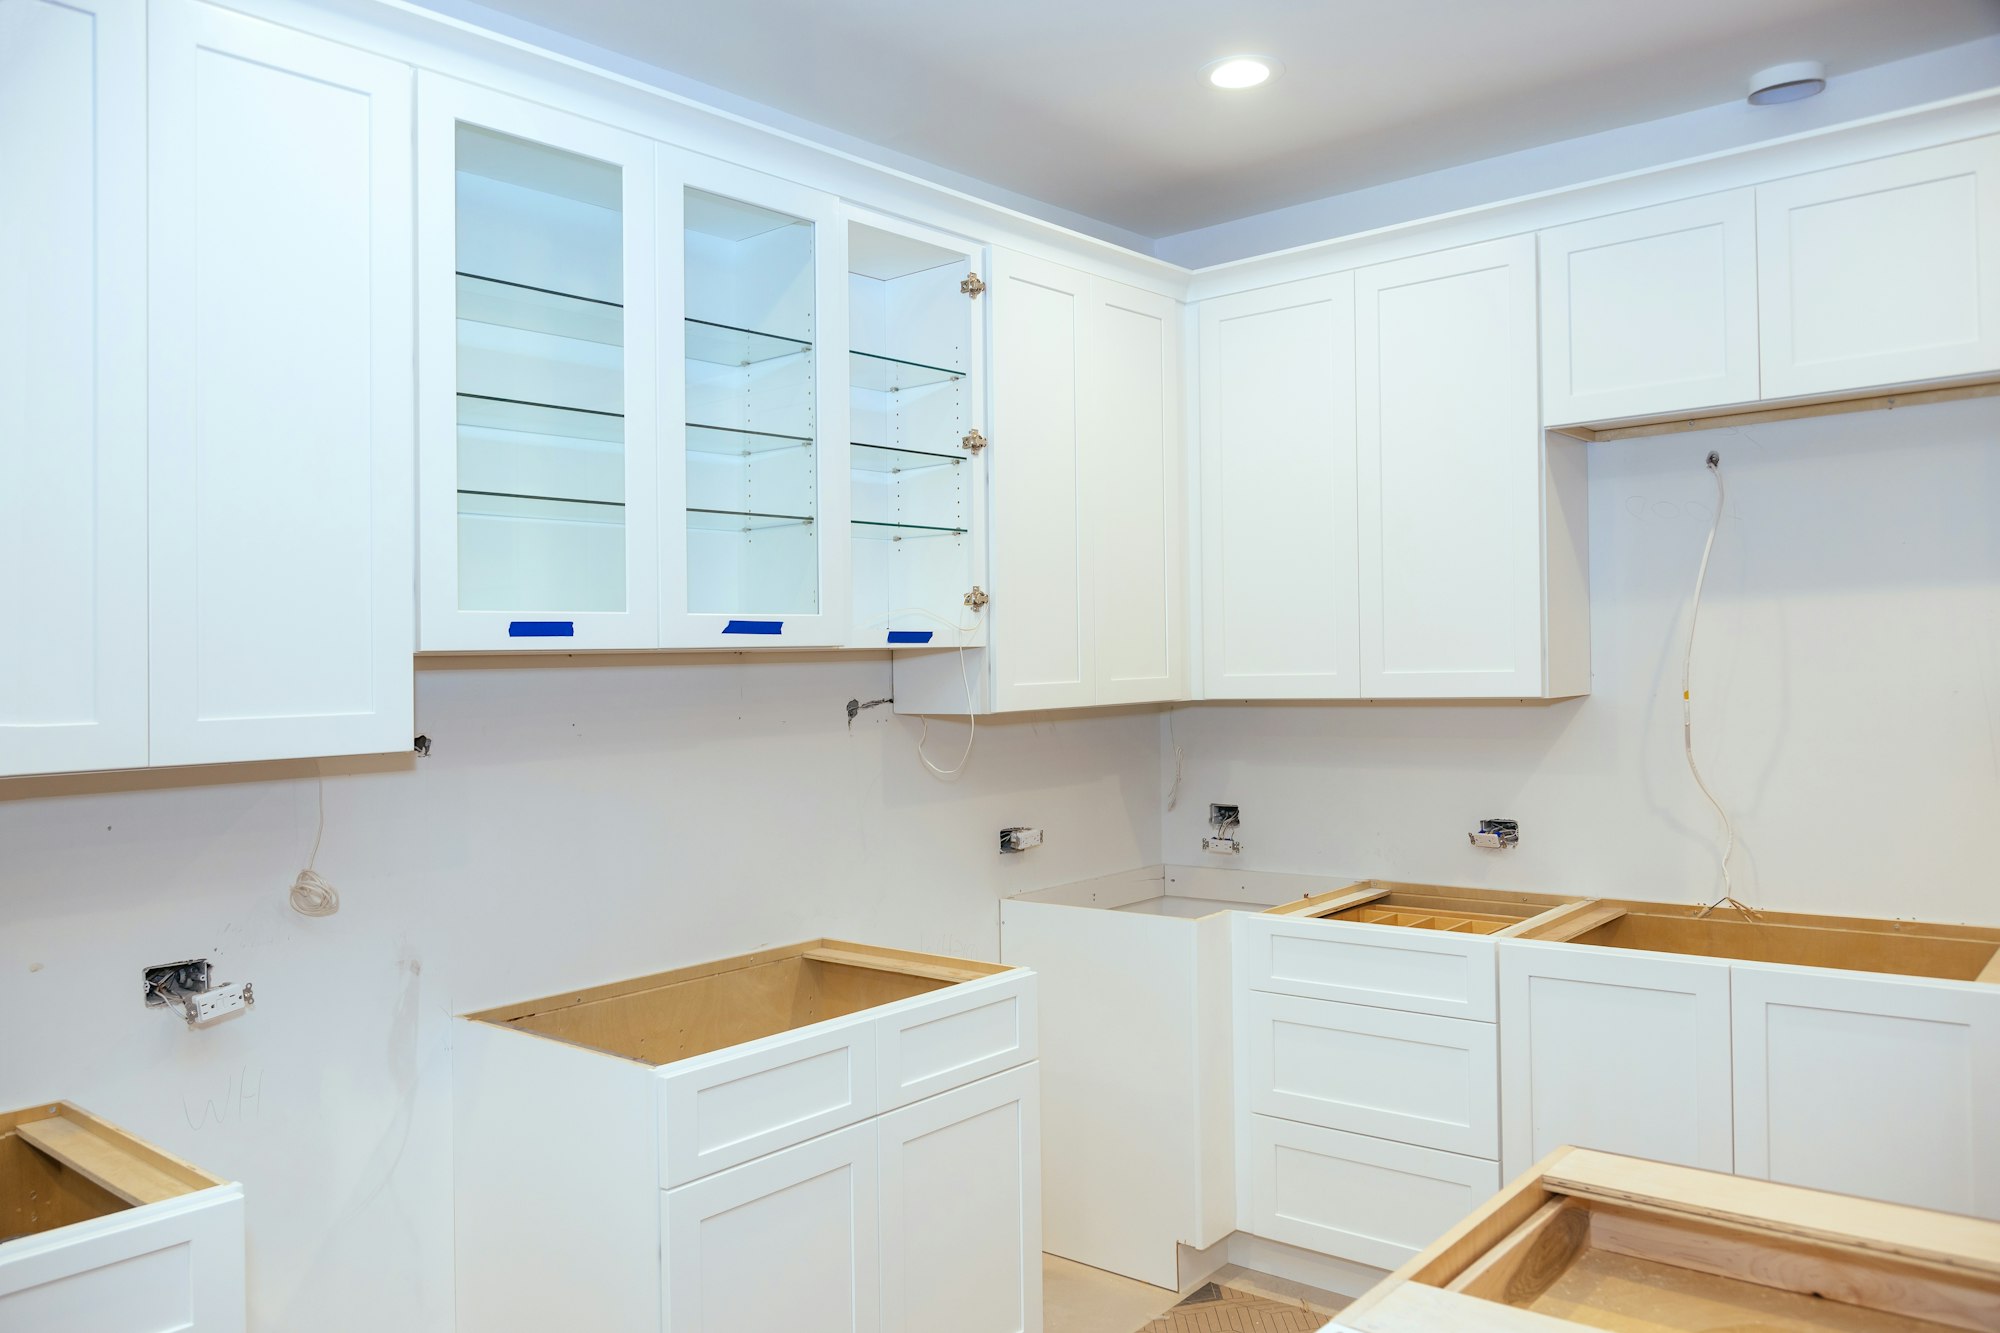 Remodeling kitchen cabinets and assembling kitchen furniture